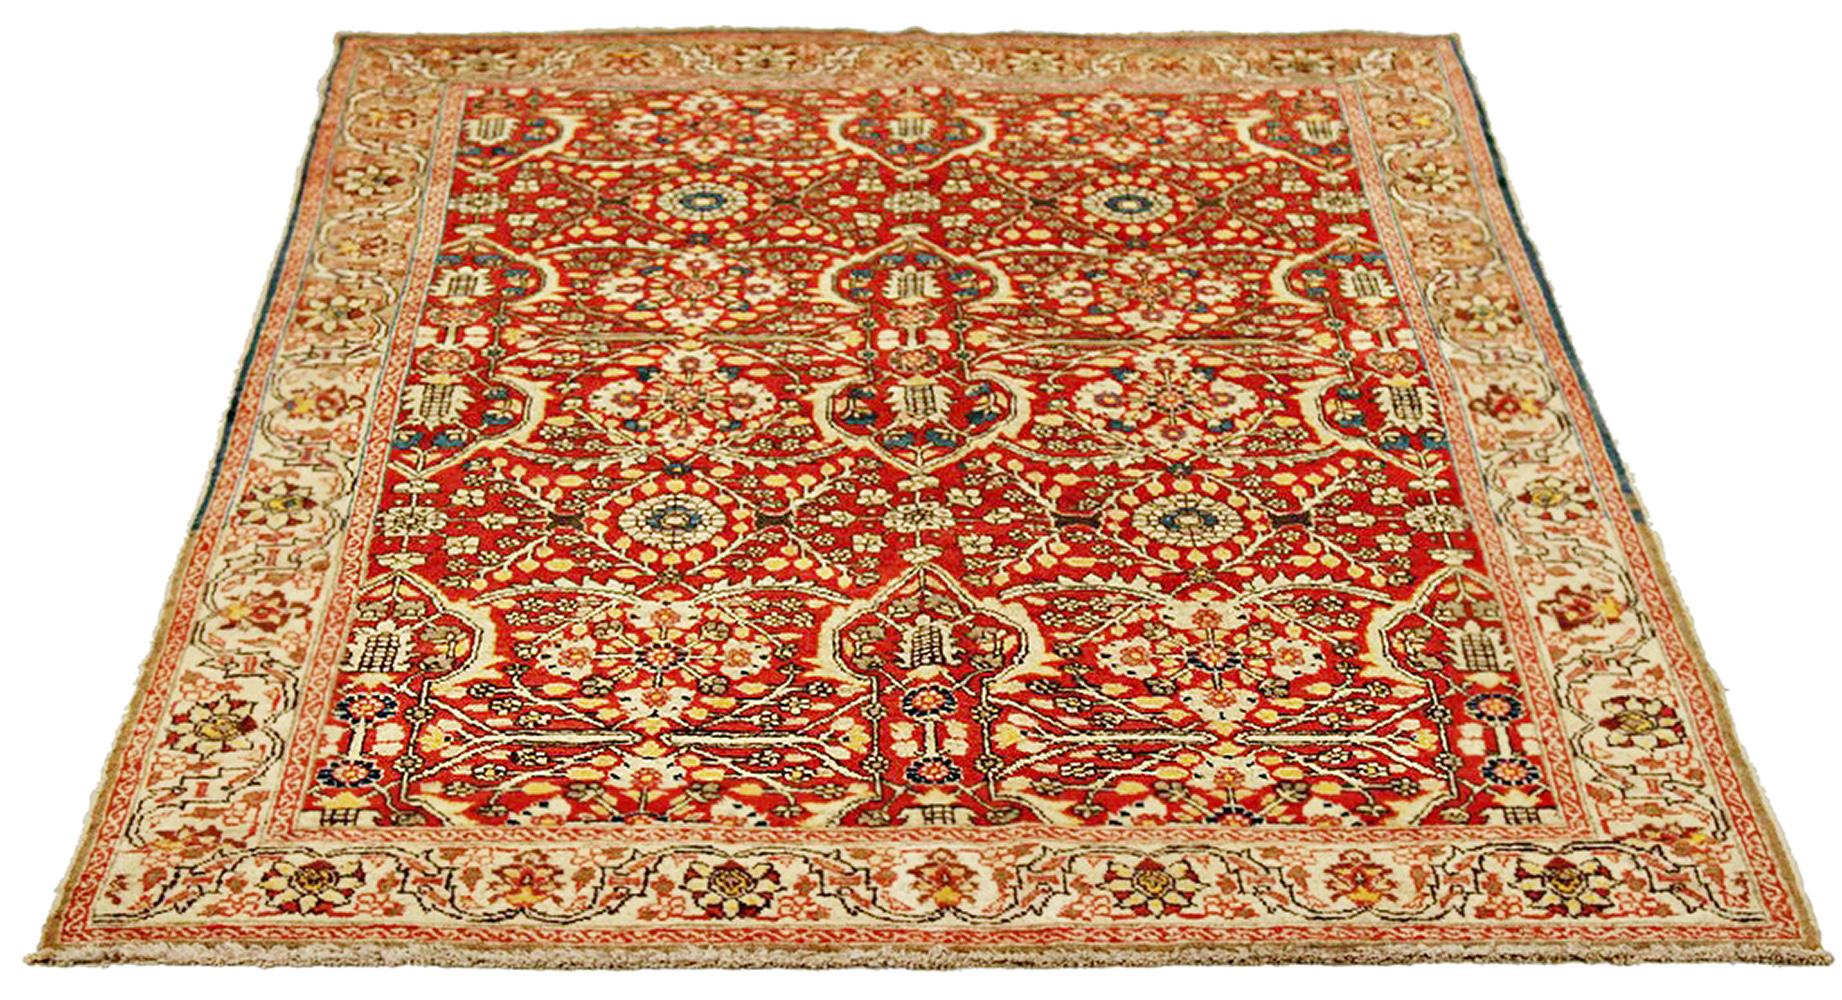 Antique Persian rug handwoven from the finest sheep’s wool and colored with all-natural vegetable dyes that are safe for humans and pets. It’s a traditional Tabriz weaving featuring a lovely ensemble of floral designs in ivory and navy over a red